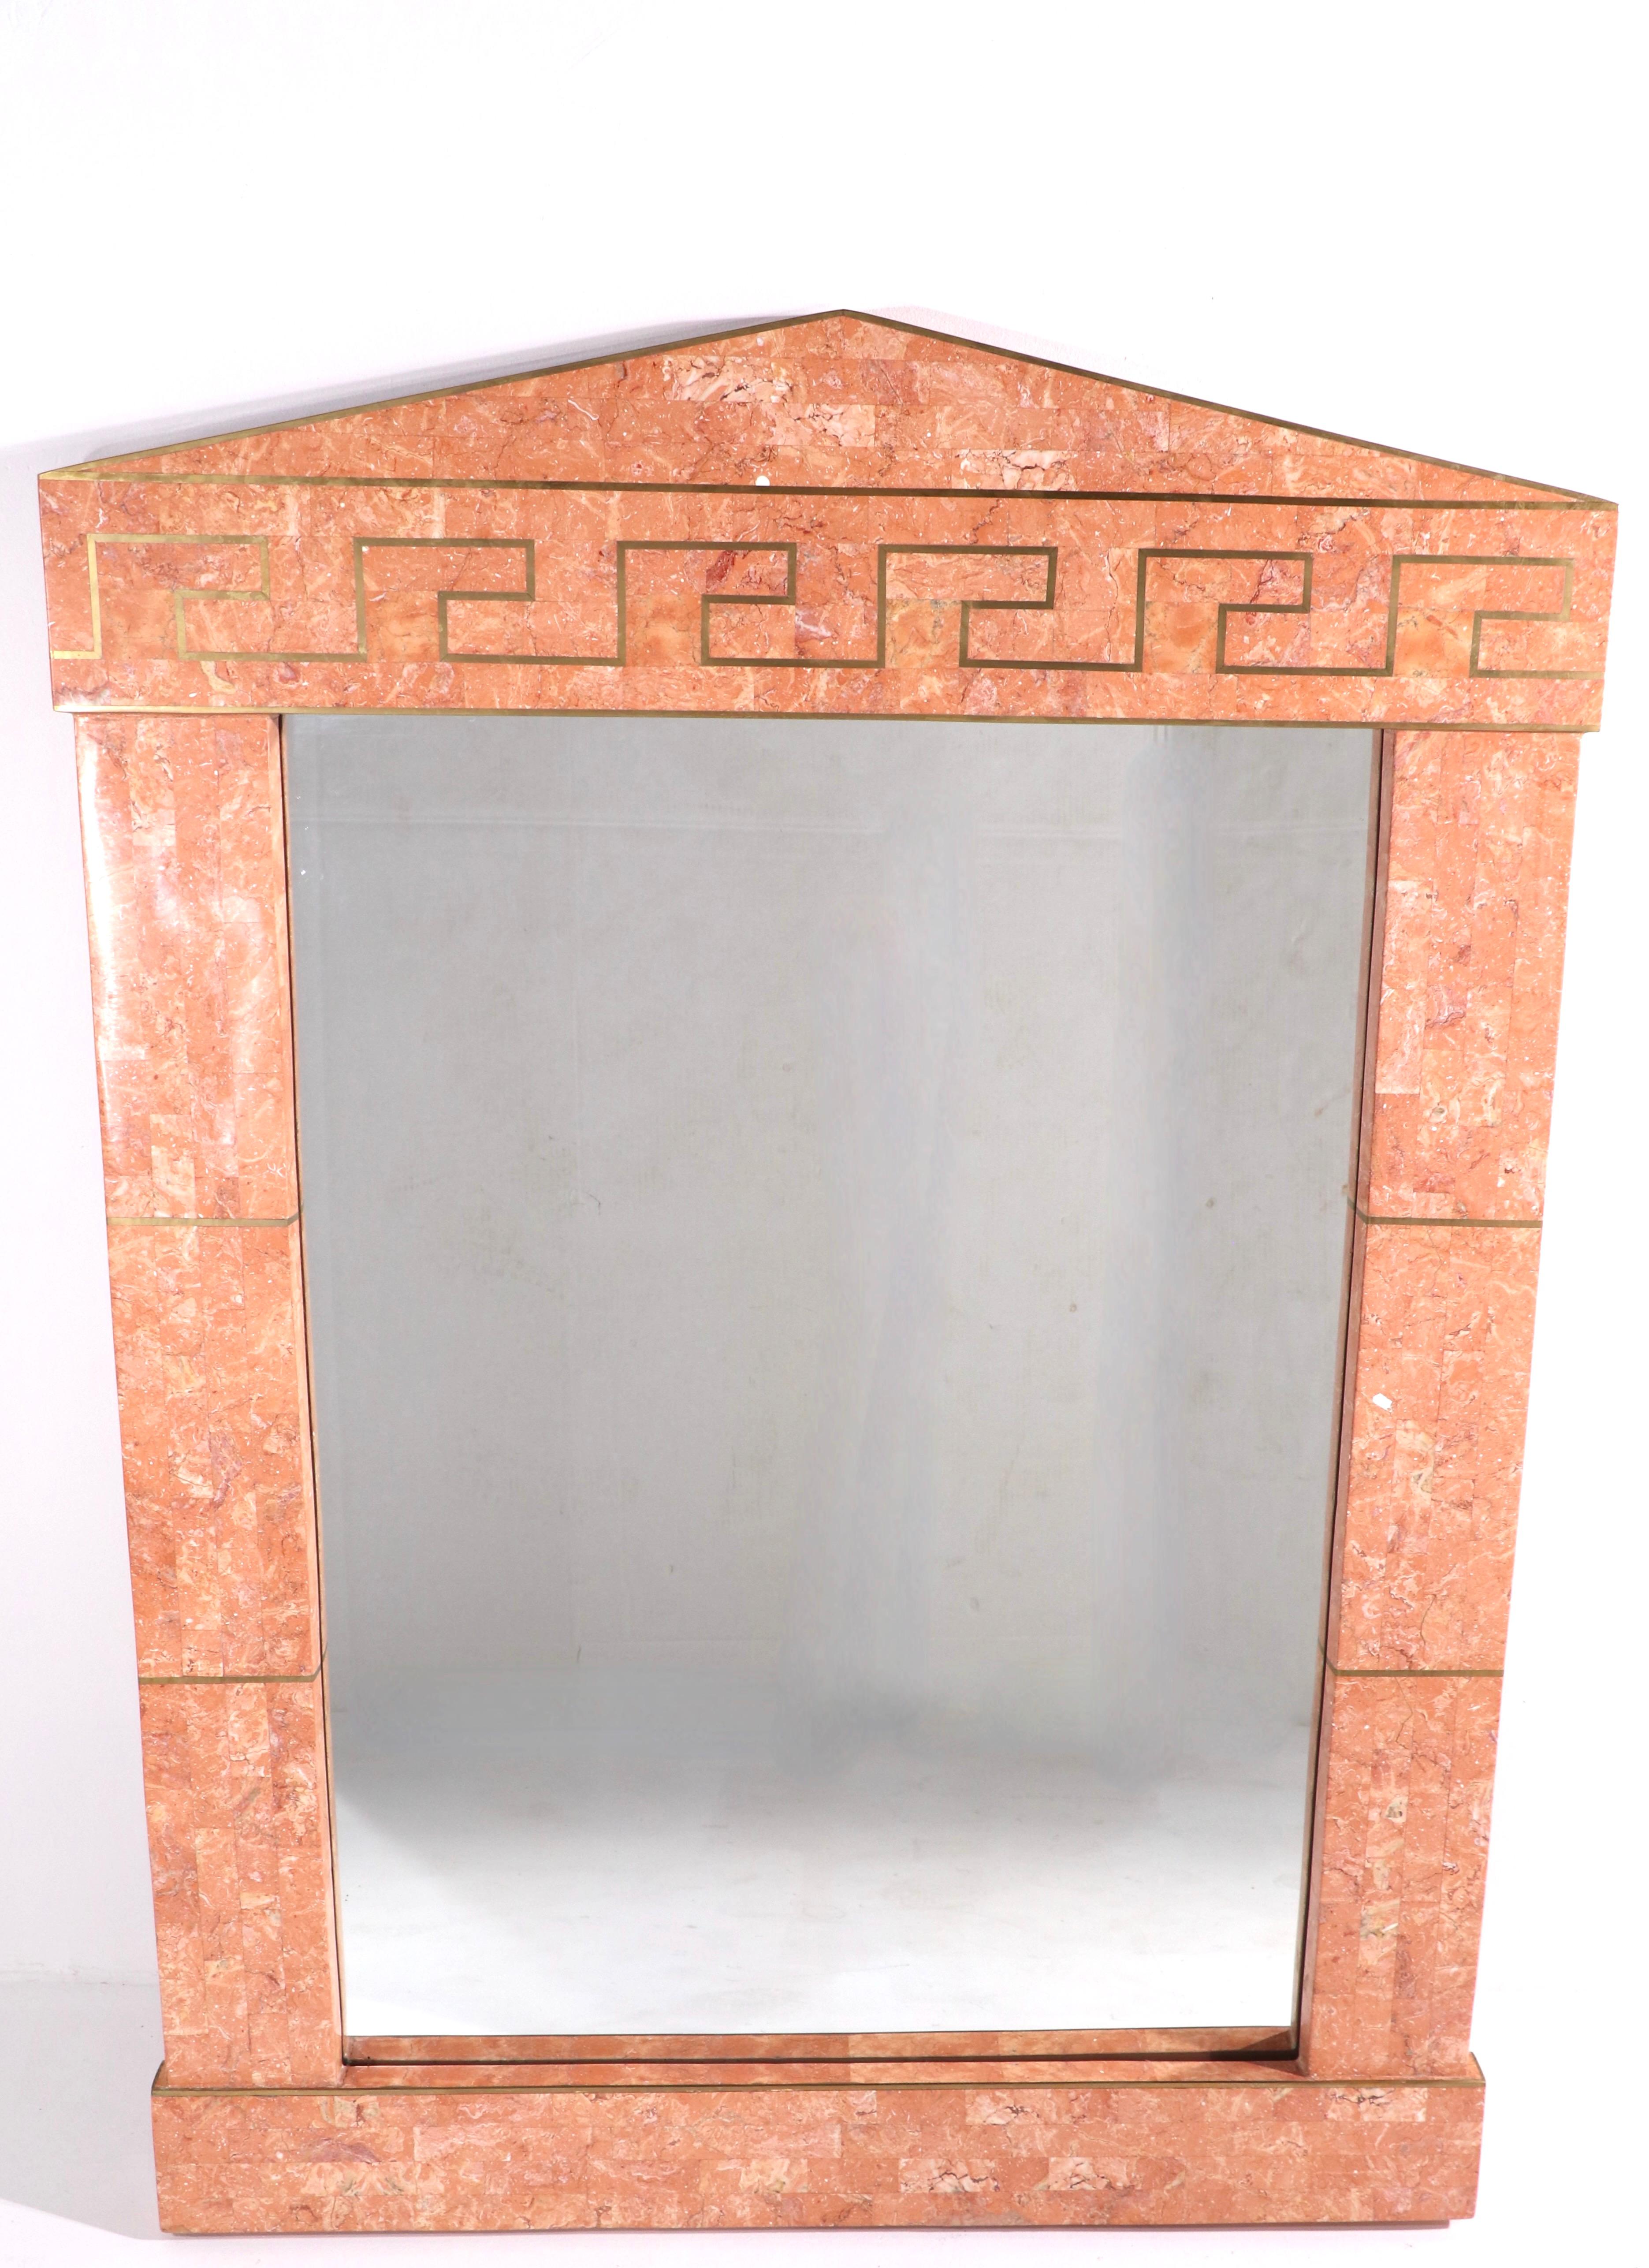 Stylish tessellated stone and brass string inly mirror by Maitland Smith. The frame has an architectural peaked top, over a rectangular inset mirror. It is in very Fine, original, clean and ready to install condition - this chic 1970's Art Deco